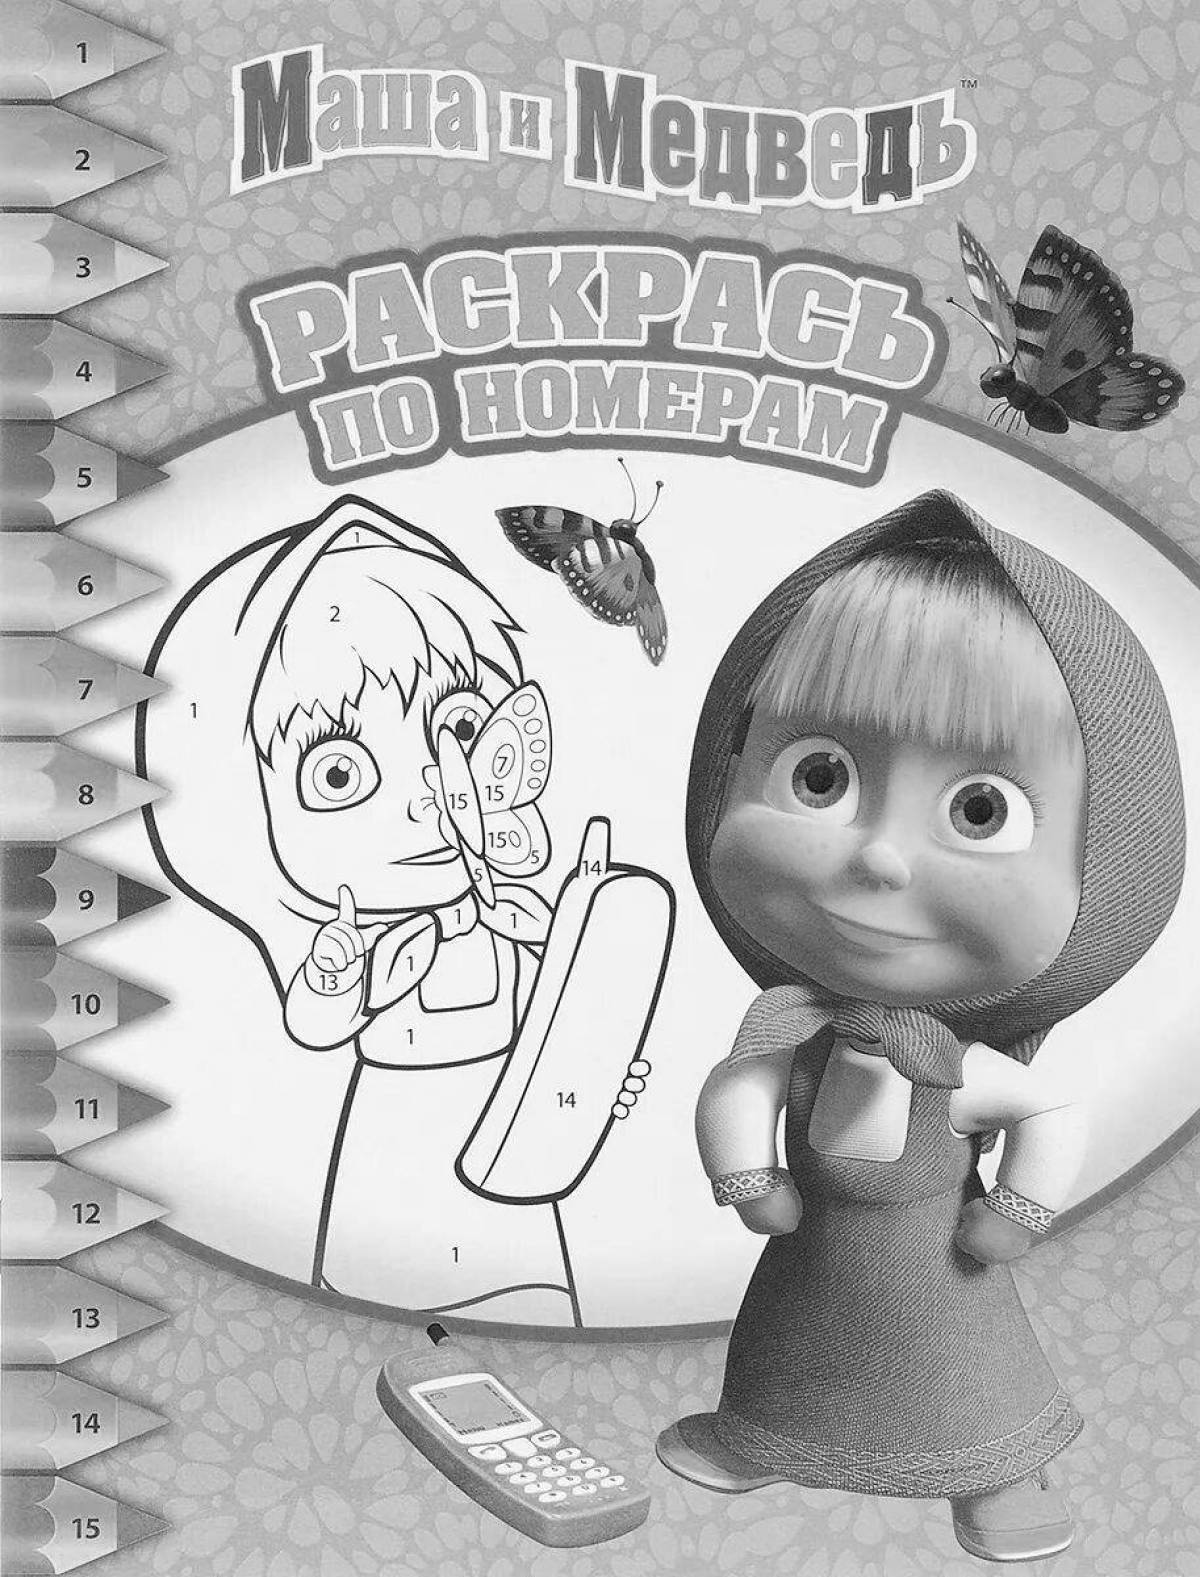 Charm of masha and the bear by numbers